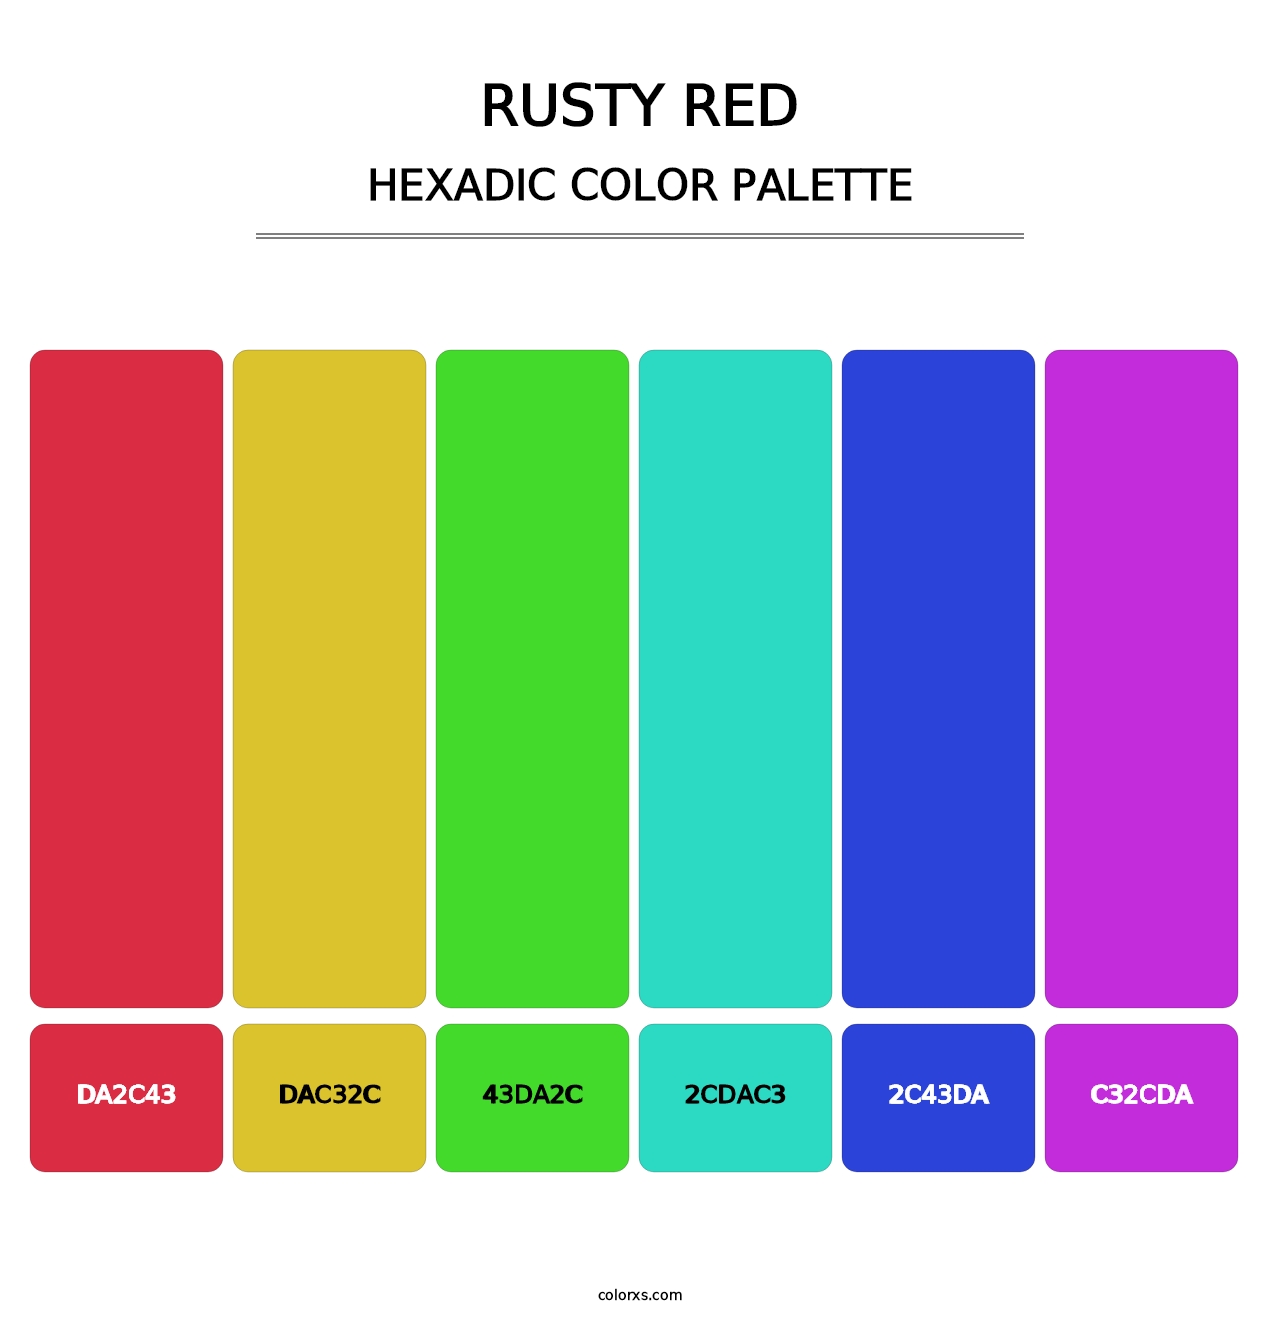 Rusty Red - Hexadic Color Palette